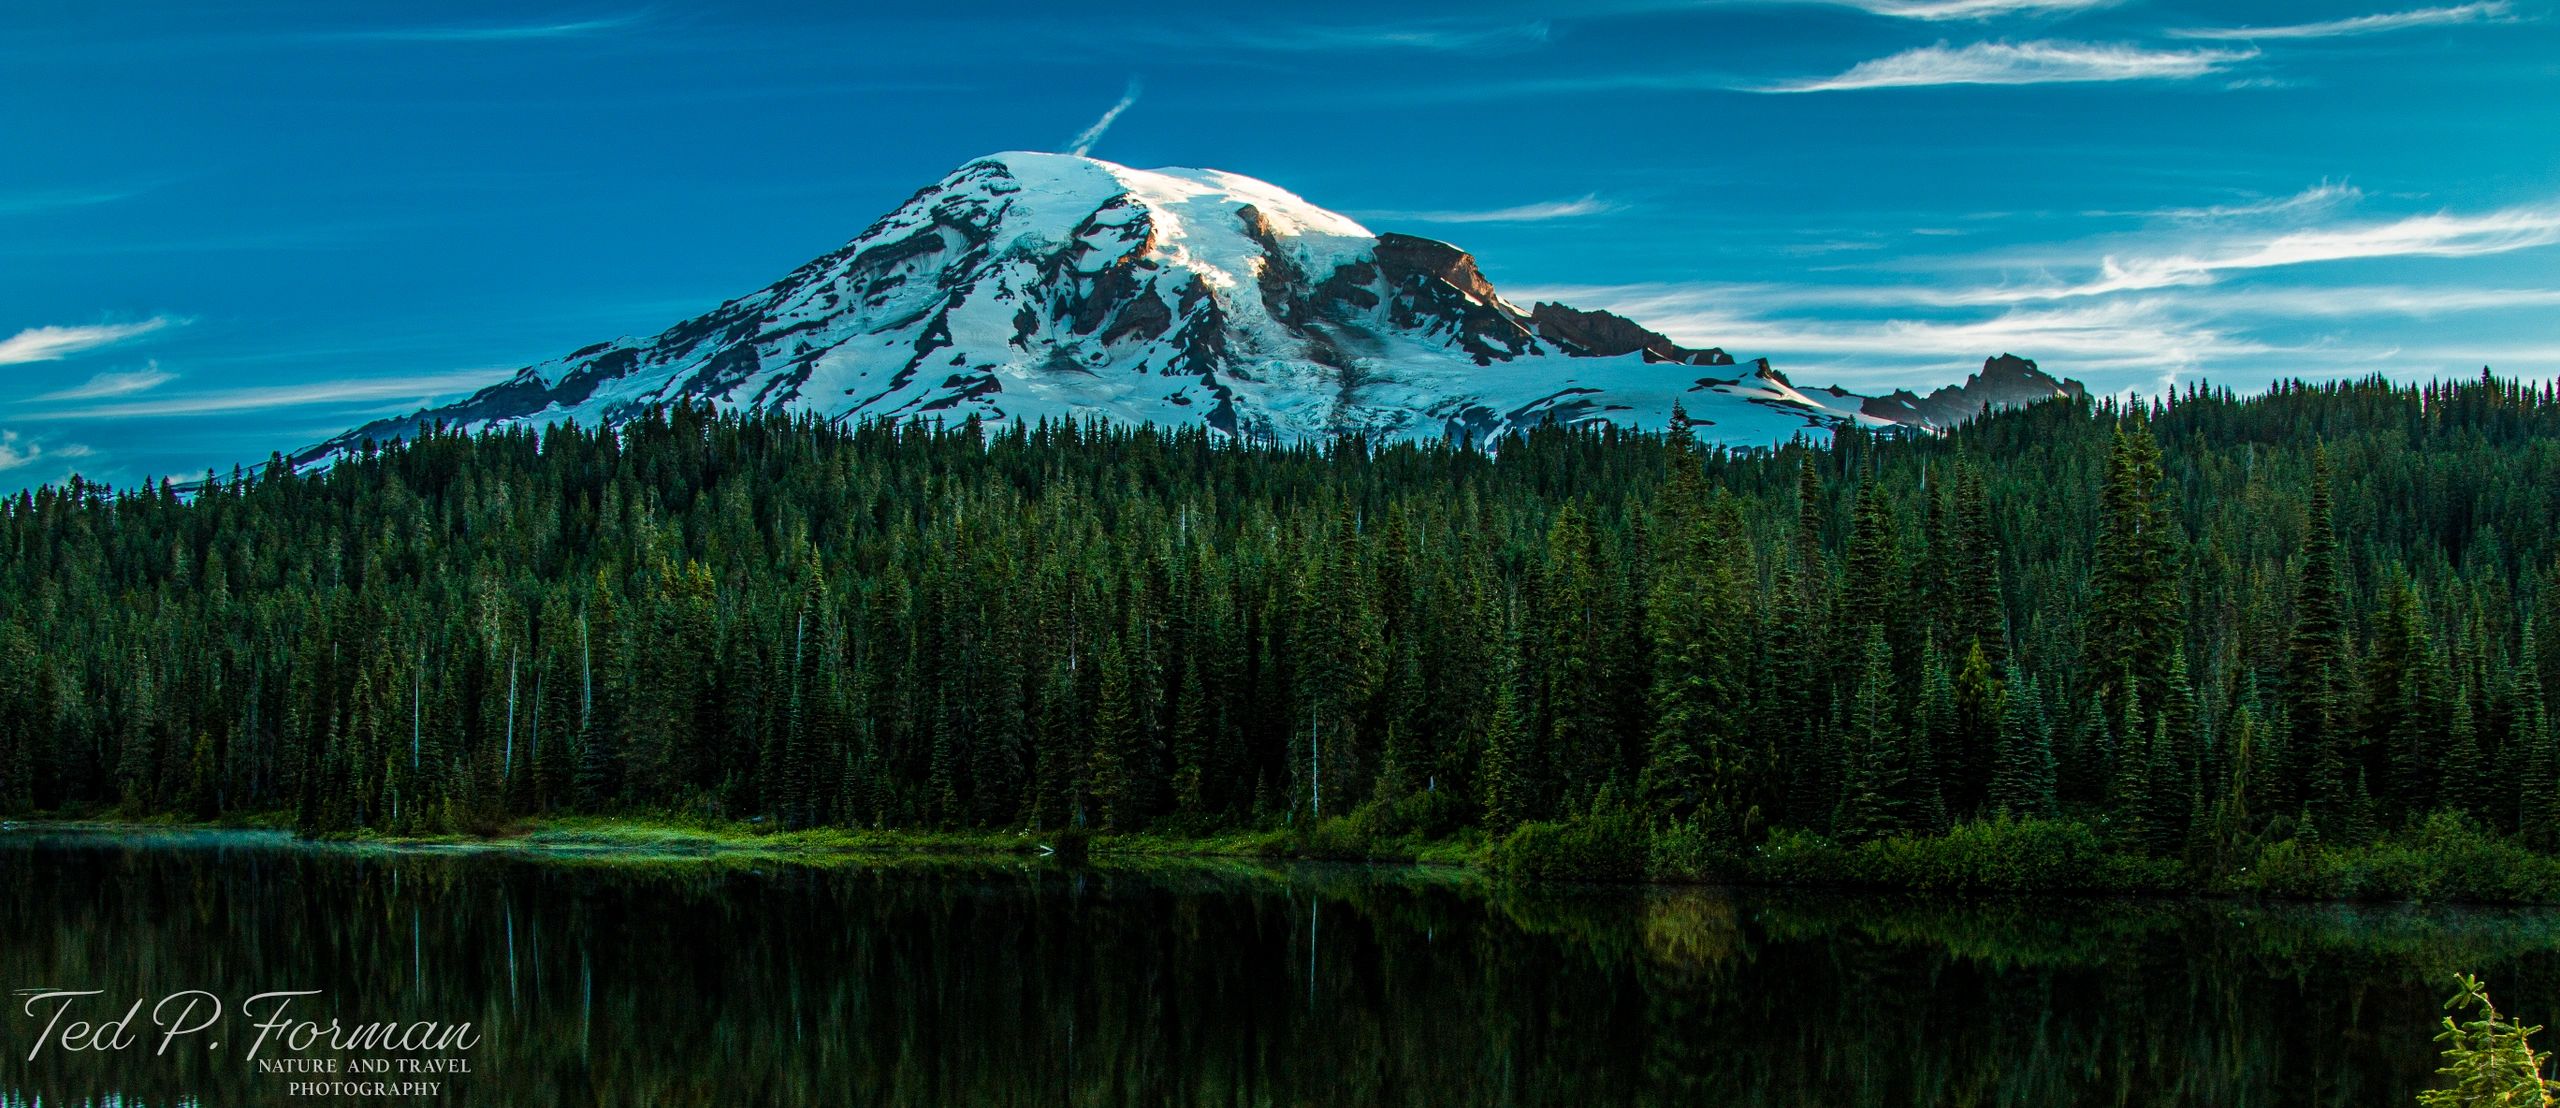 Mount Rainier peeking behind pine tree forest and reflected in a lake